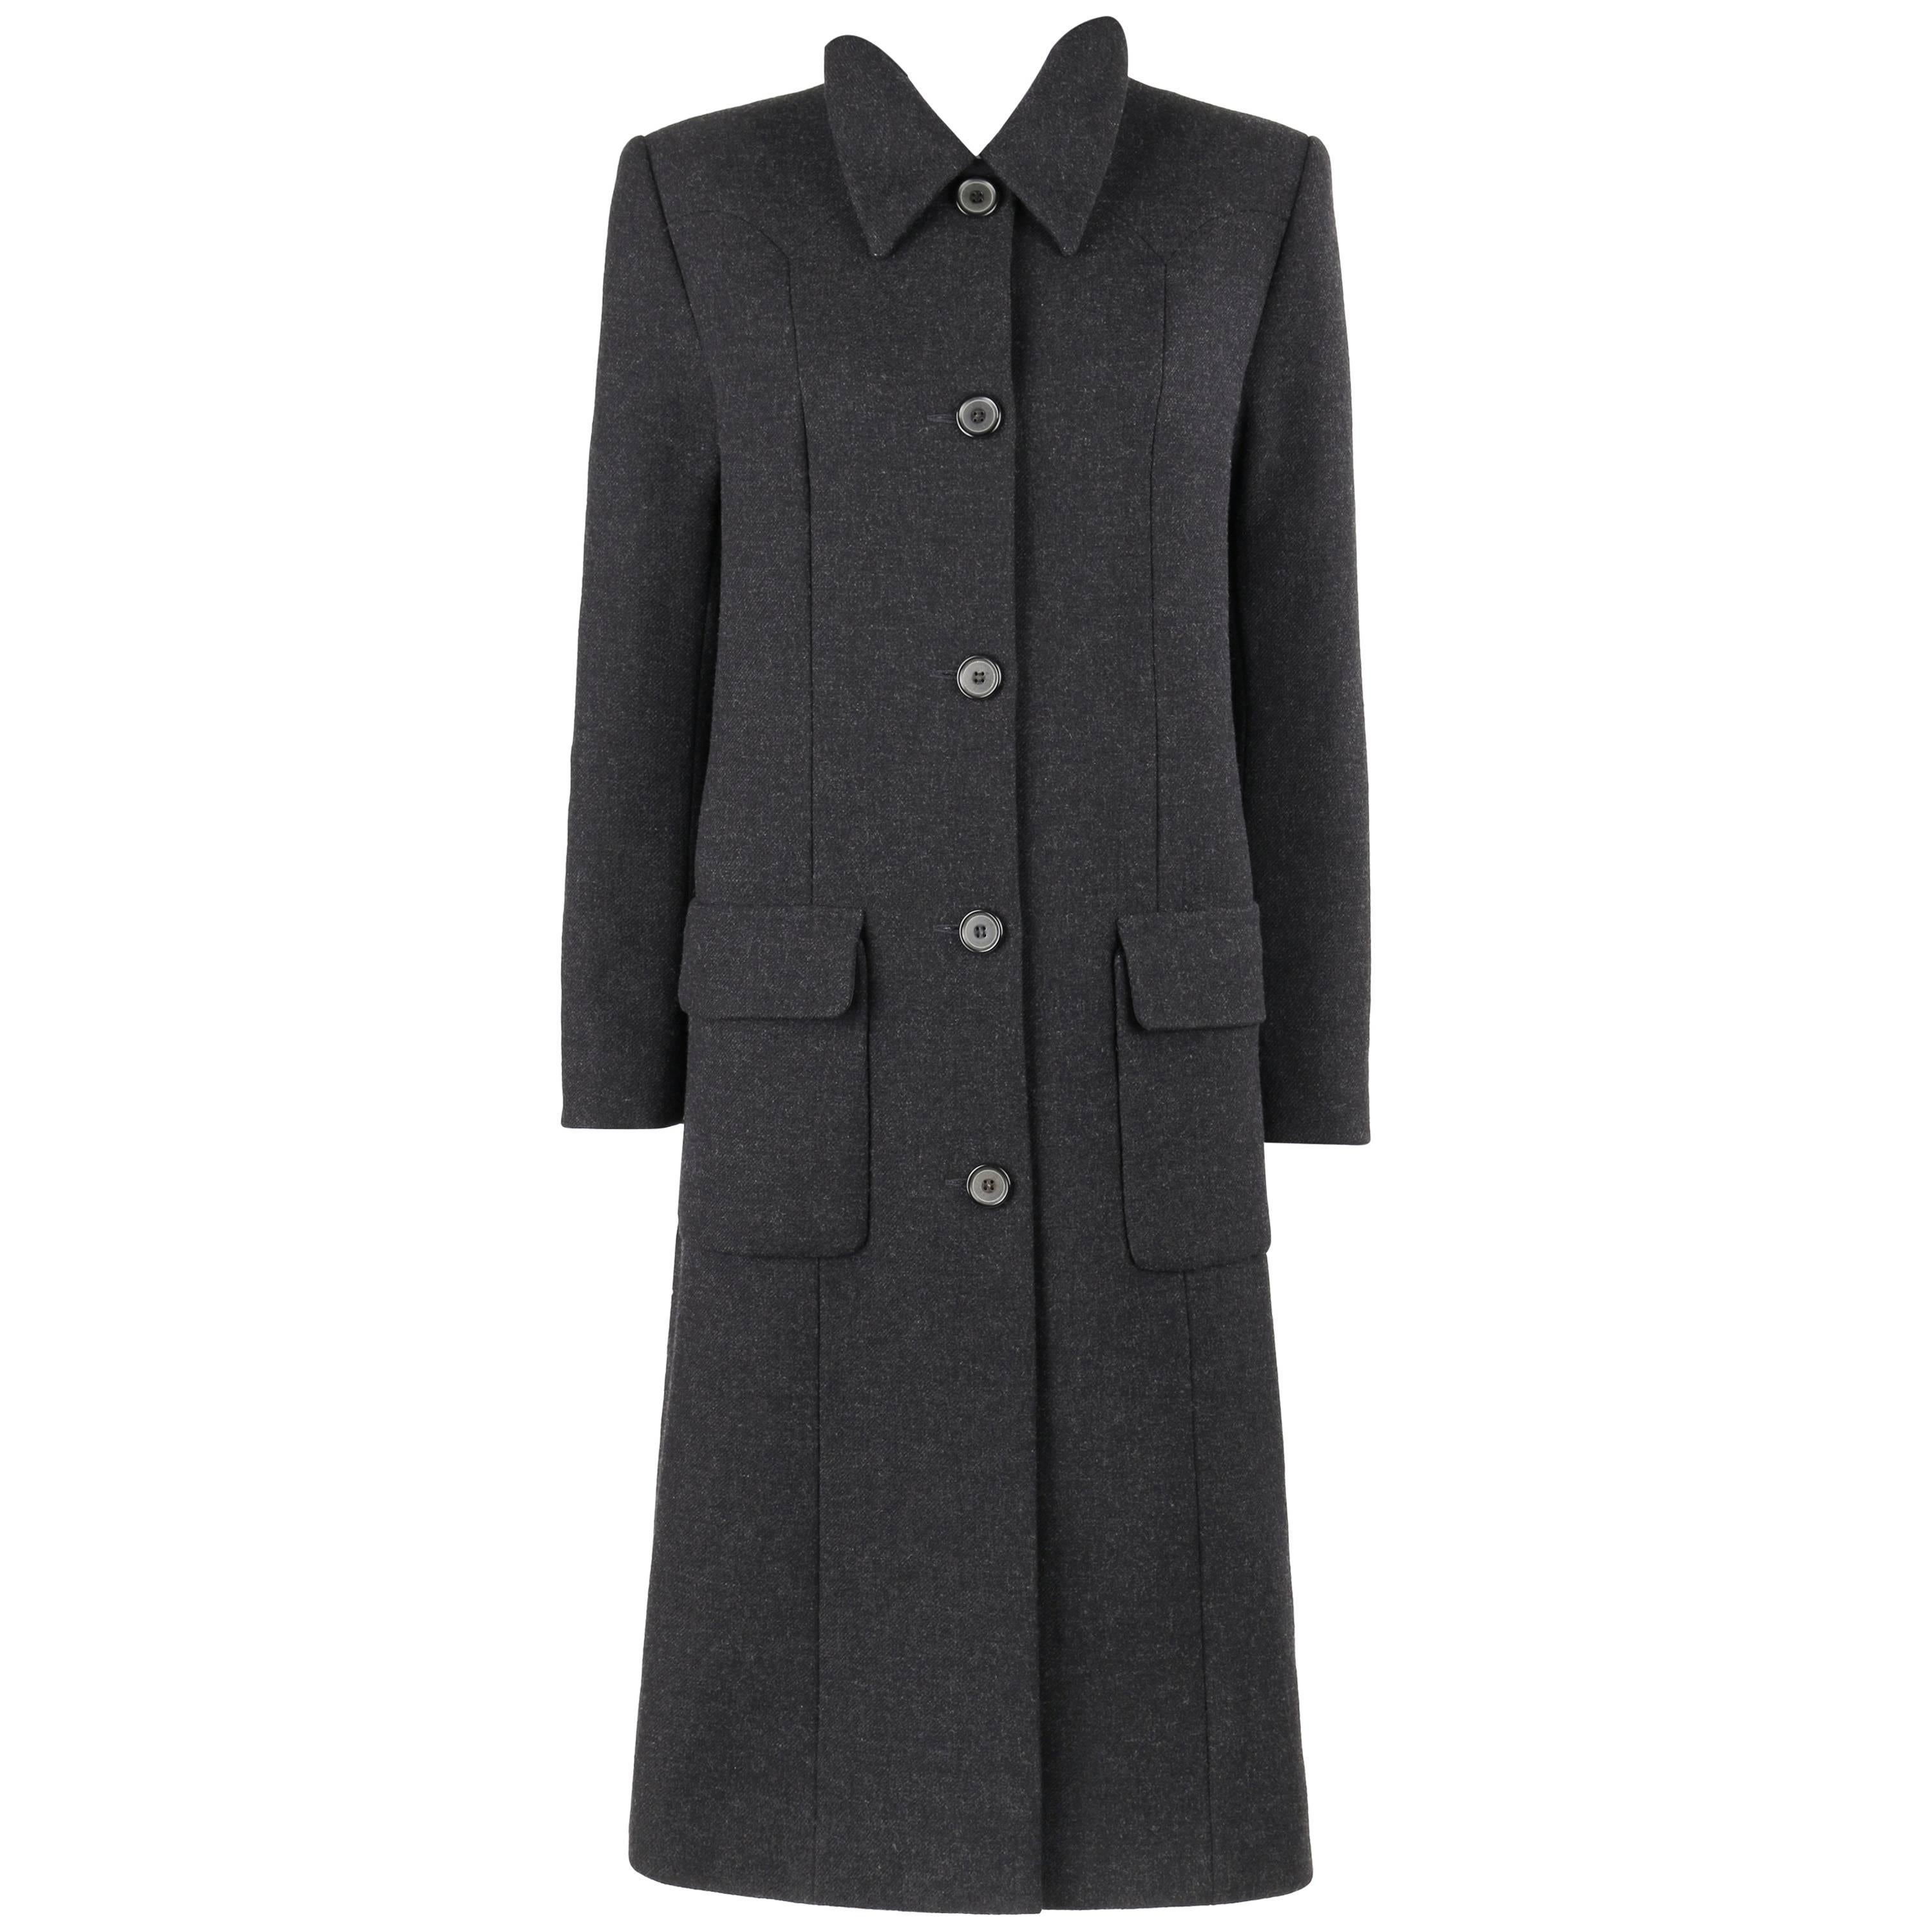 GIVENCHY Couture A/W 1998 ALEXANDER McQUEEN Charcoal Gray Wool Coat Overcoat For Sale